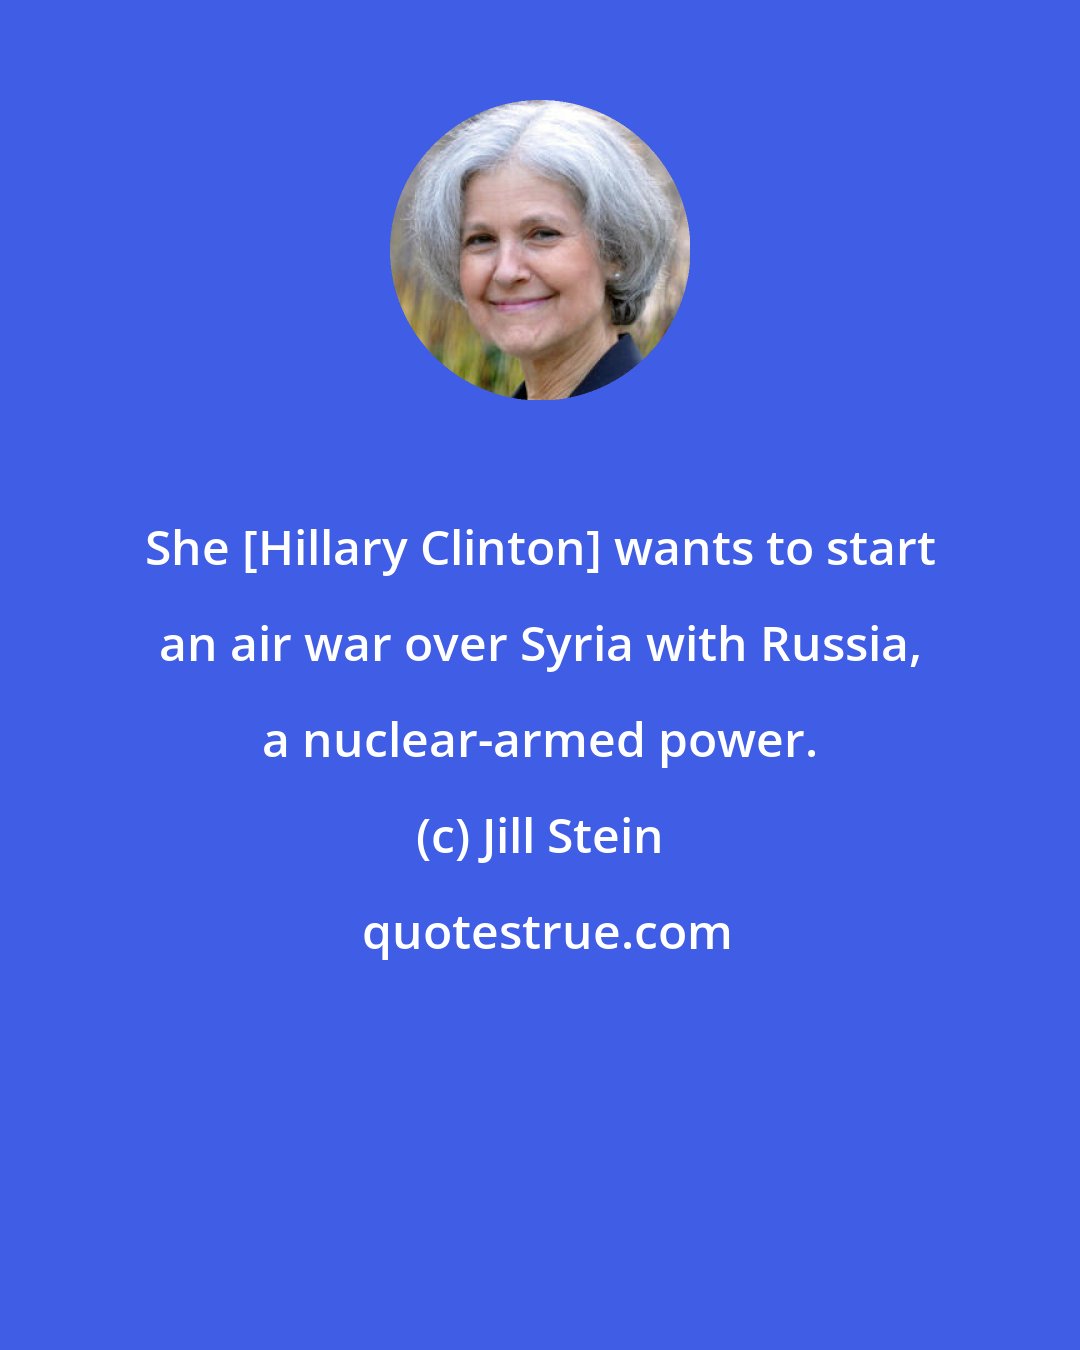 Jill Stein: She [Hillary Clinton] wants to start an air war over Syria with Russia, a nuclear-armed power.